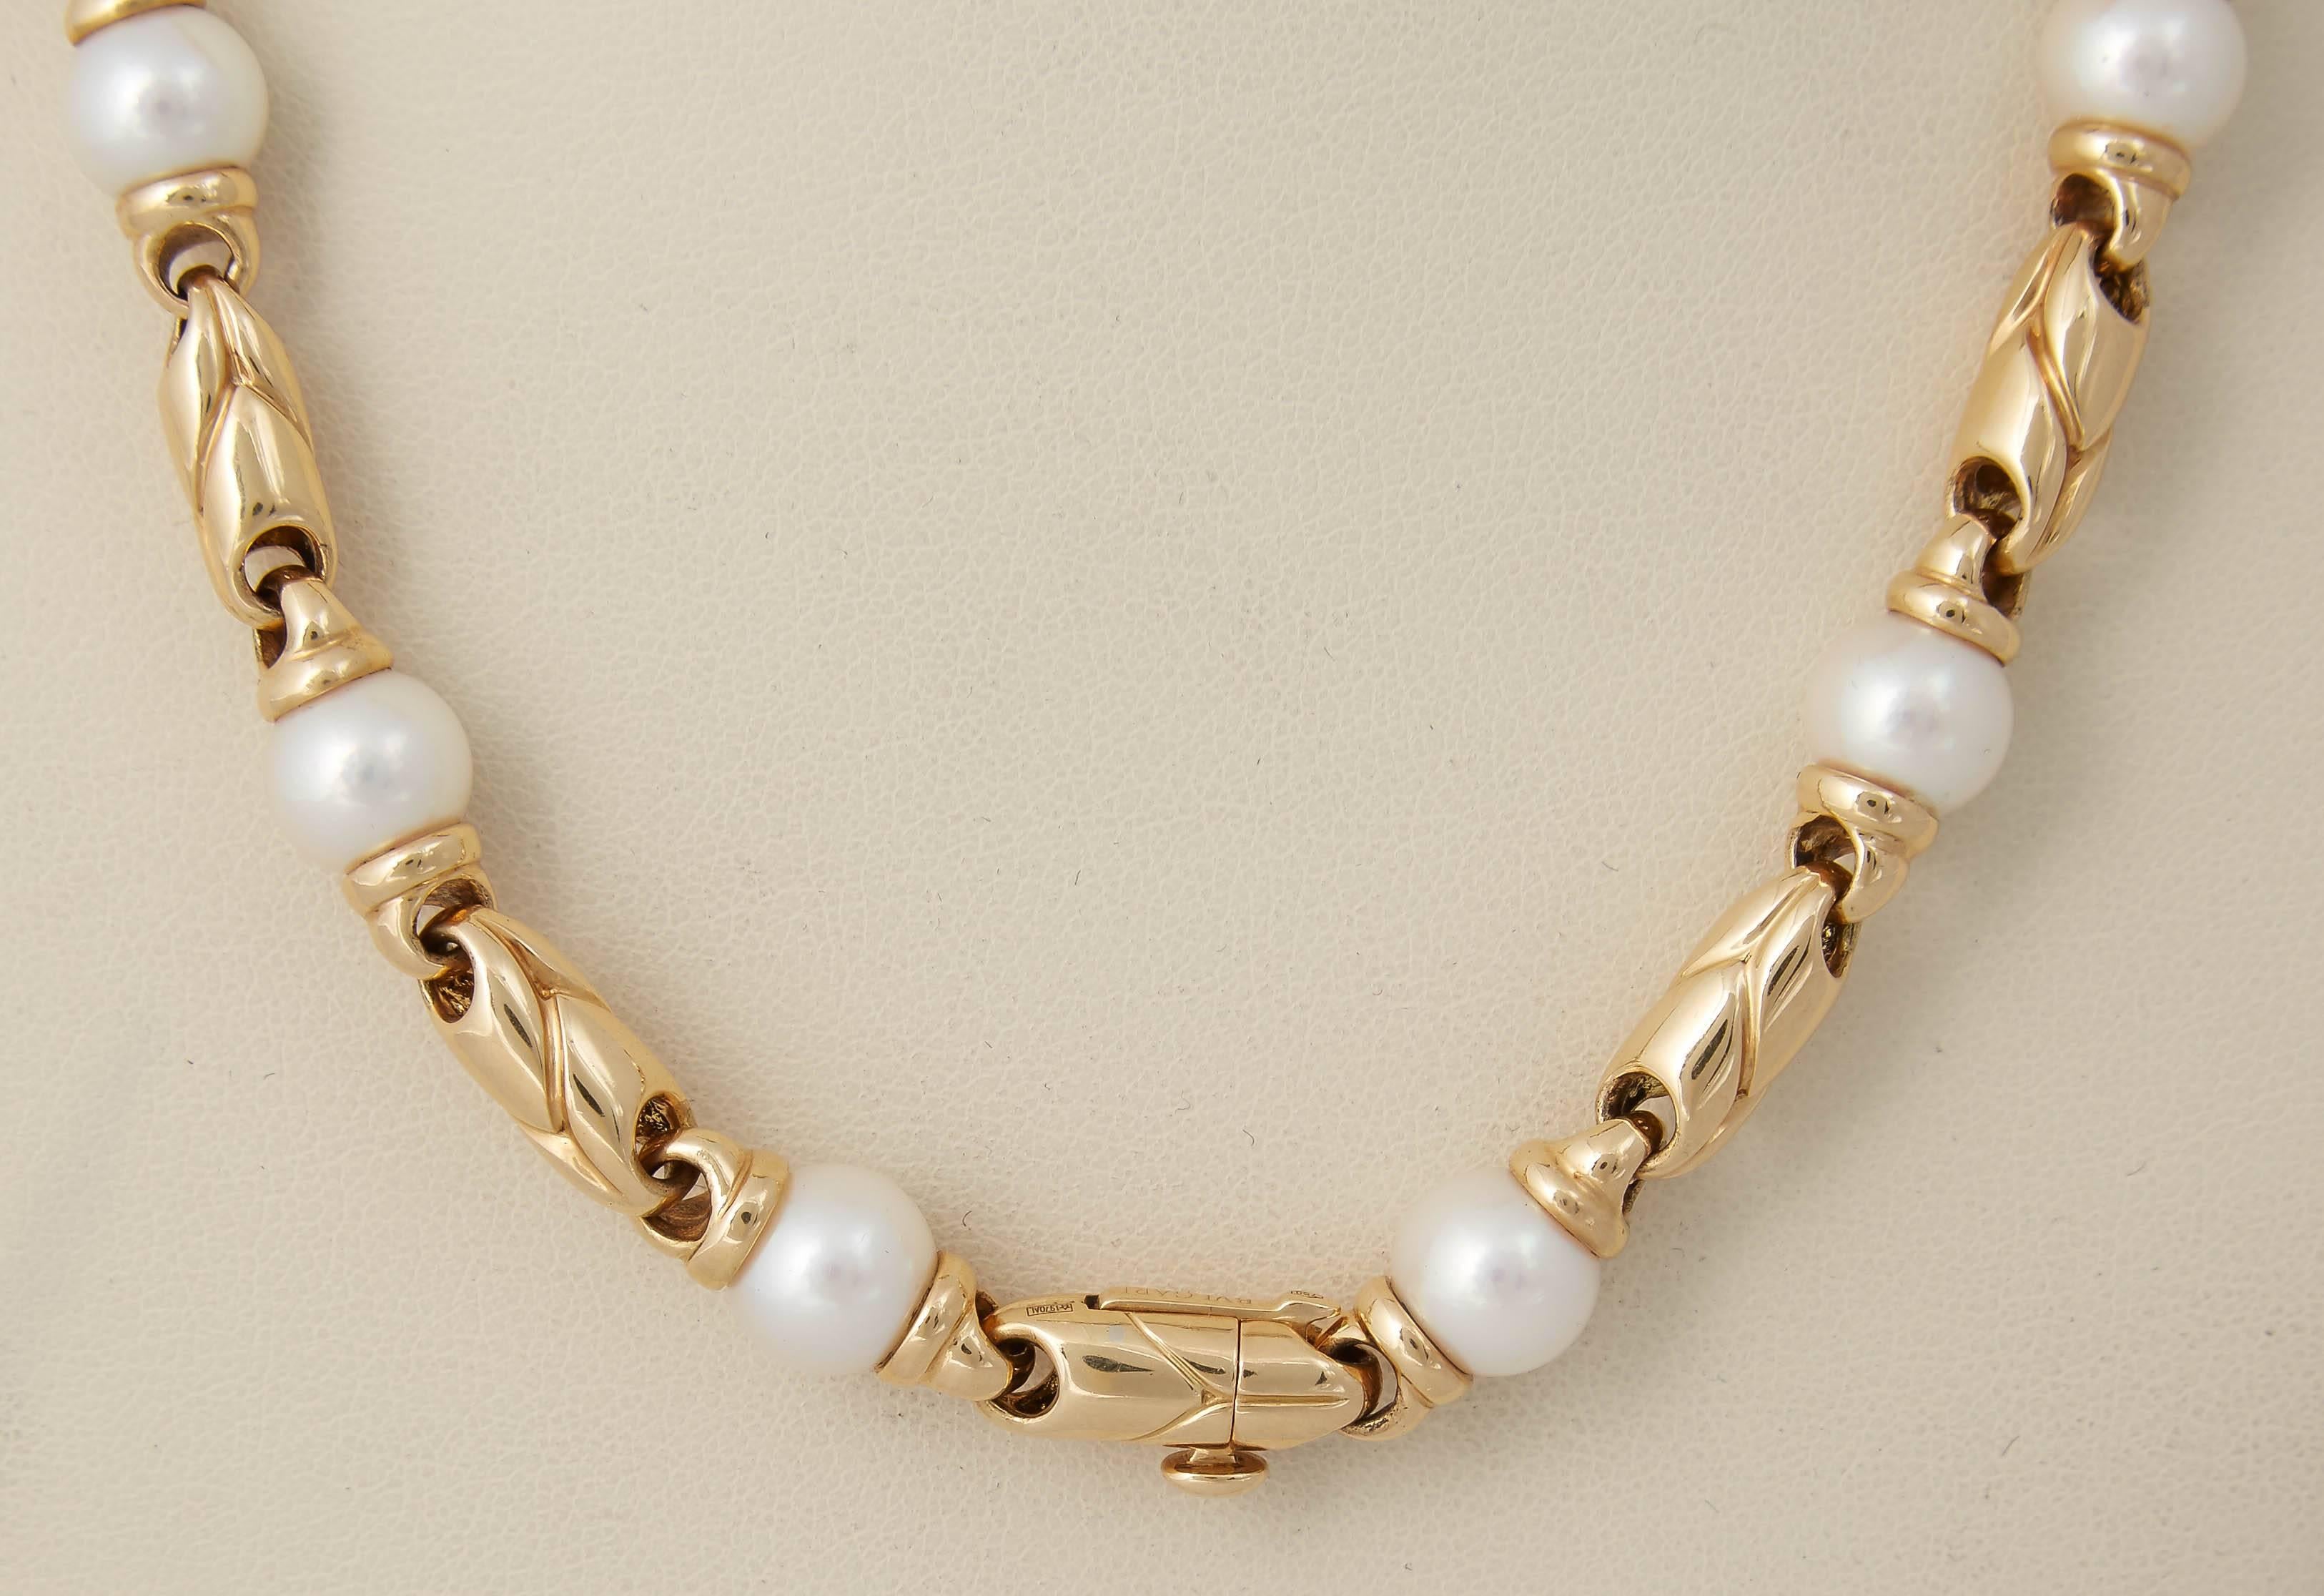 18kt Yellow Gold 22 & 1/2 Long Chain Designed By BVLGARI and may be Worn Separately As A Choker Measuring 15 & 1/2 Inches And A Bracelet Measuring Approximately 7 Inches. Designed By BVLGARI With [ 20] Very High Quality 7.5 Mm Beautiful Luster